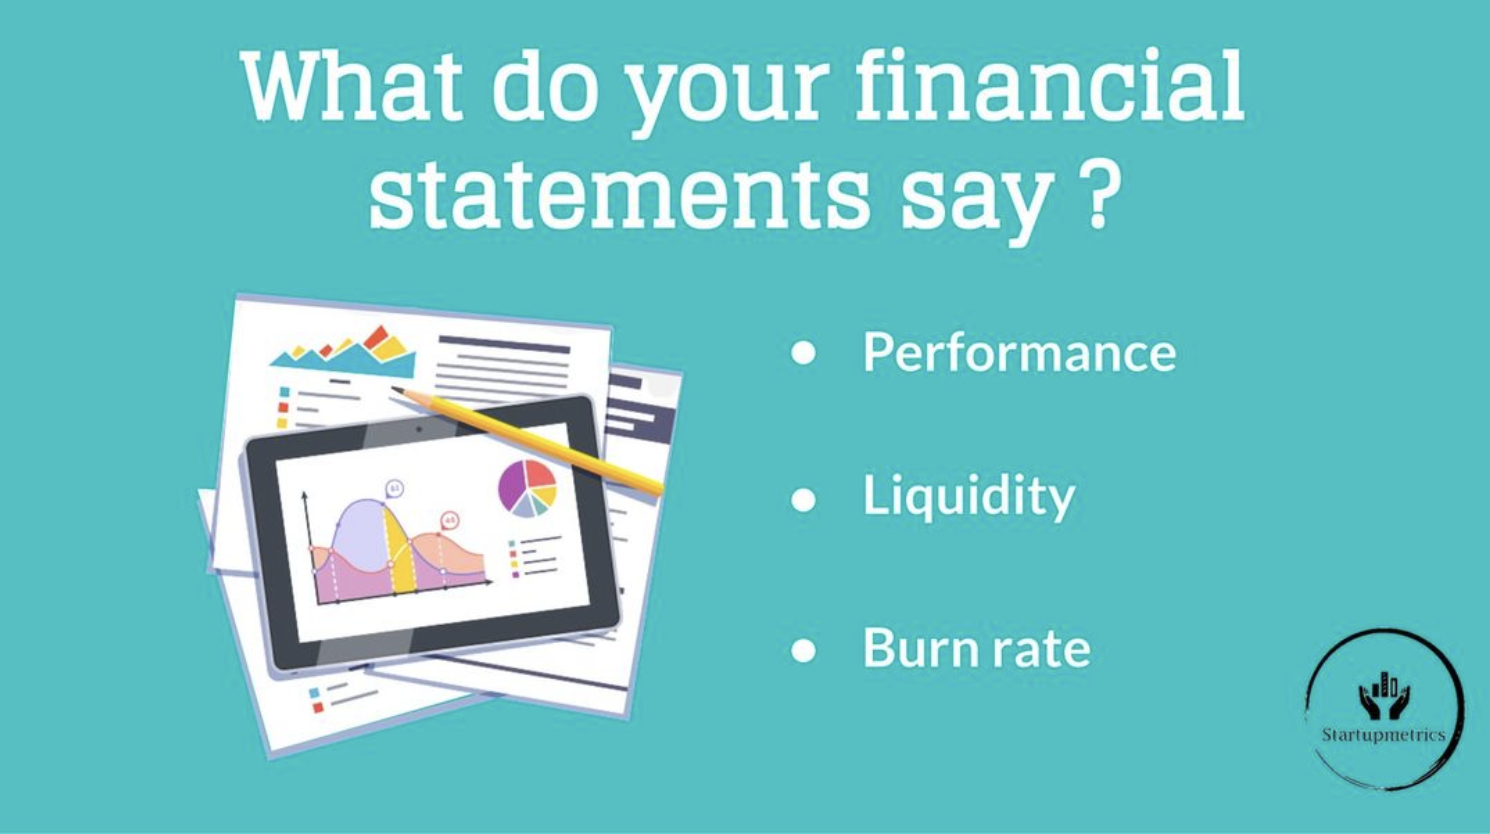 What do your financial statements say?